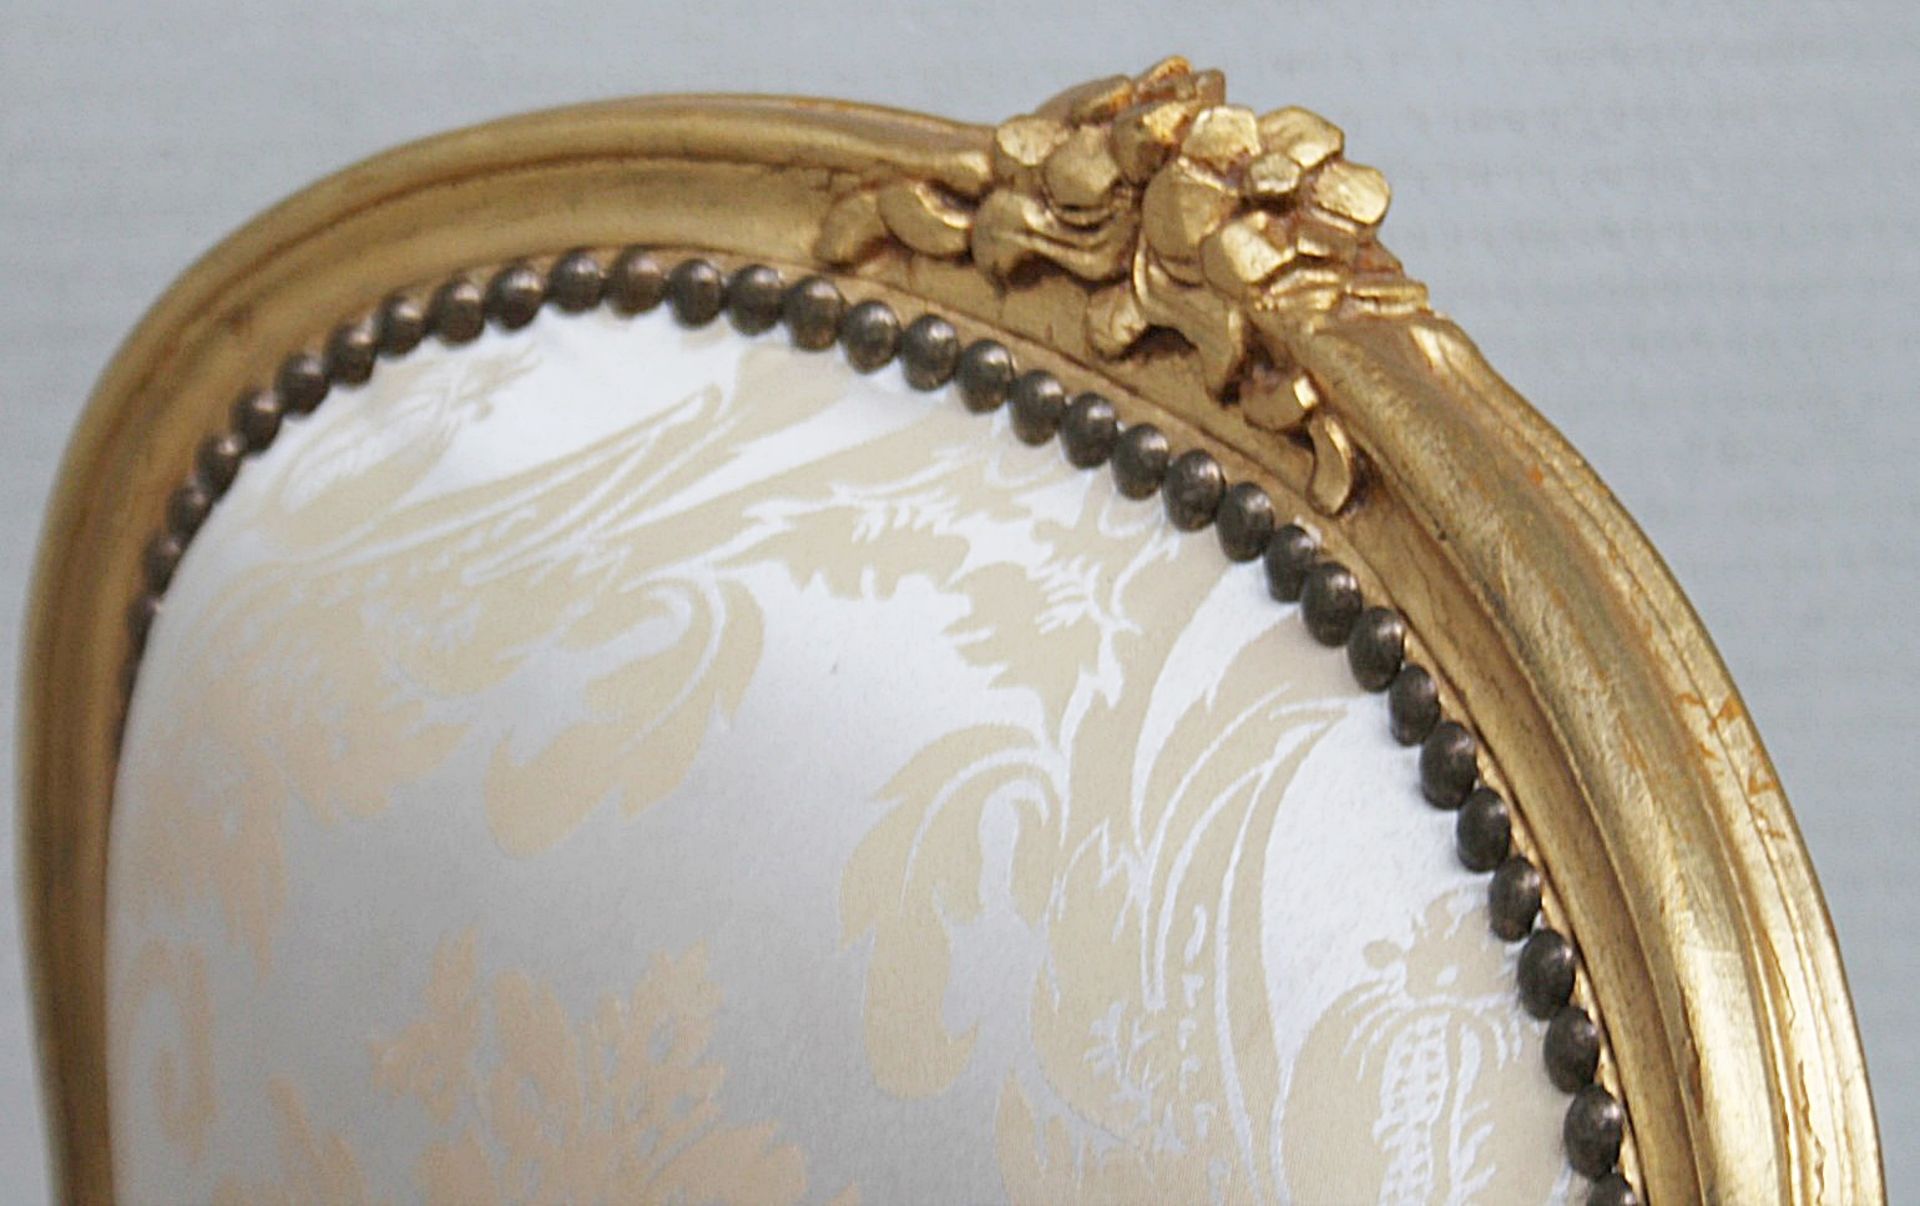 1 x Regency-Style Upholstered Chair In Gold & Silver With Ornate Carved Detailing - Recently Removed - Image 10 of 11